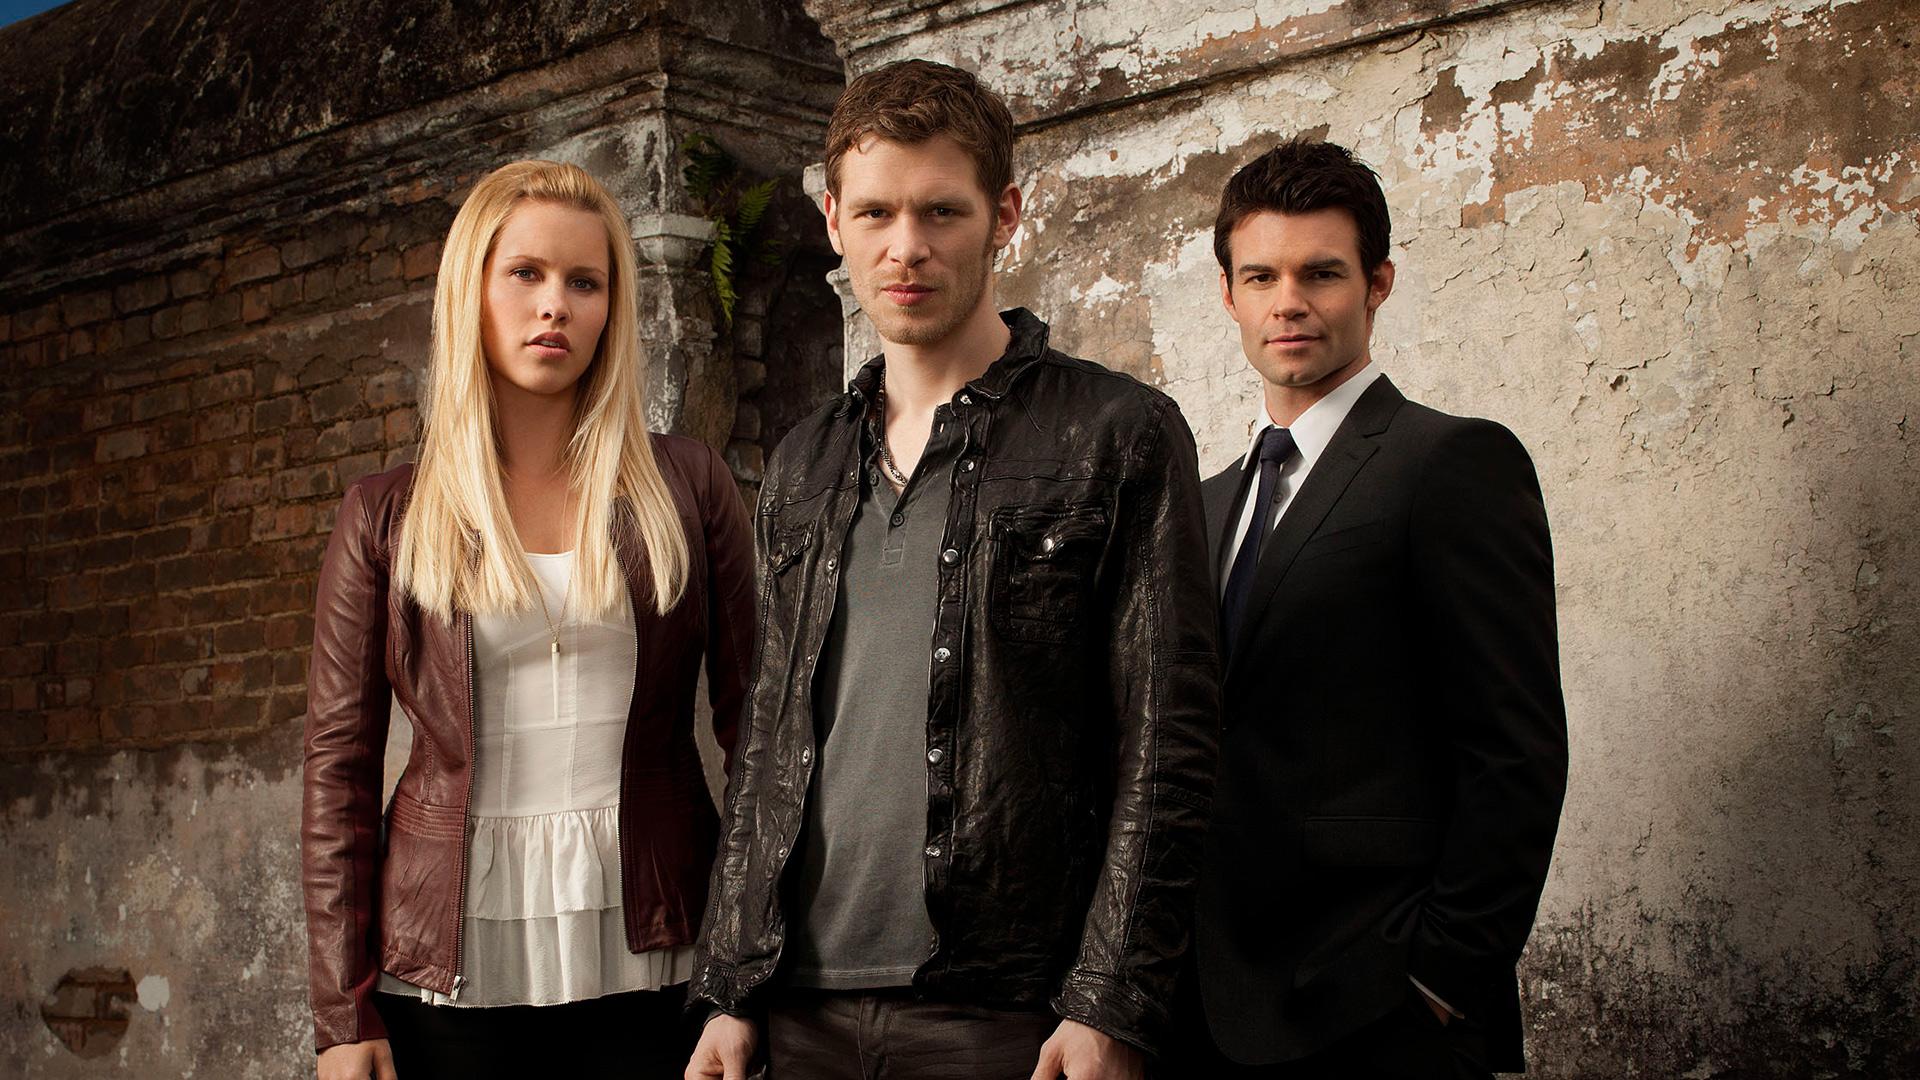 Which Mikaelson On 'The Originals' Is Your Favorite? Your Choice